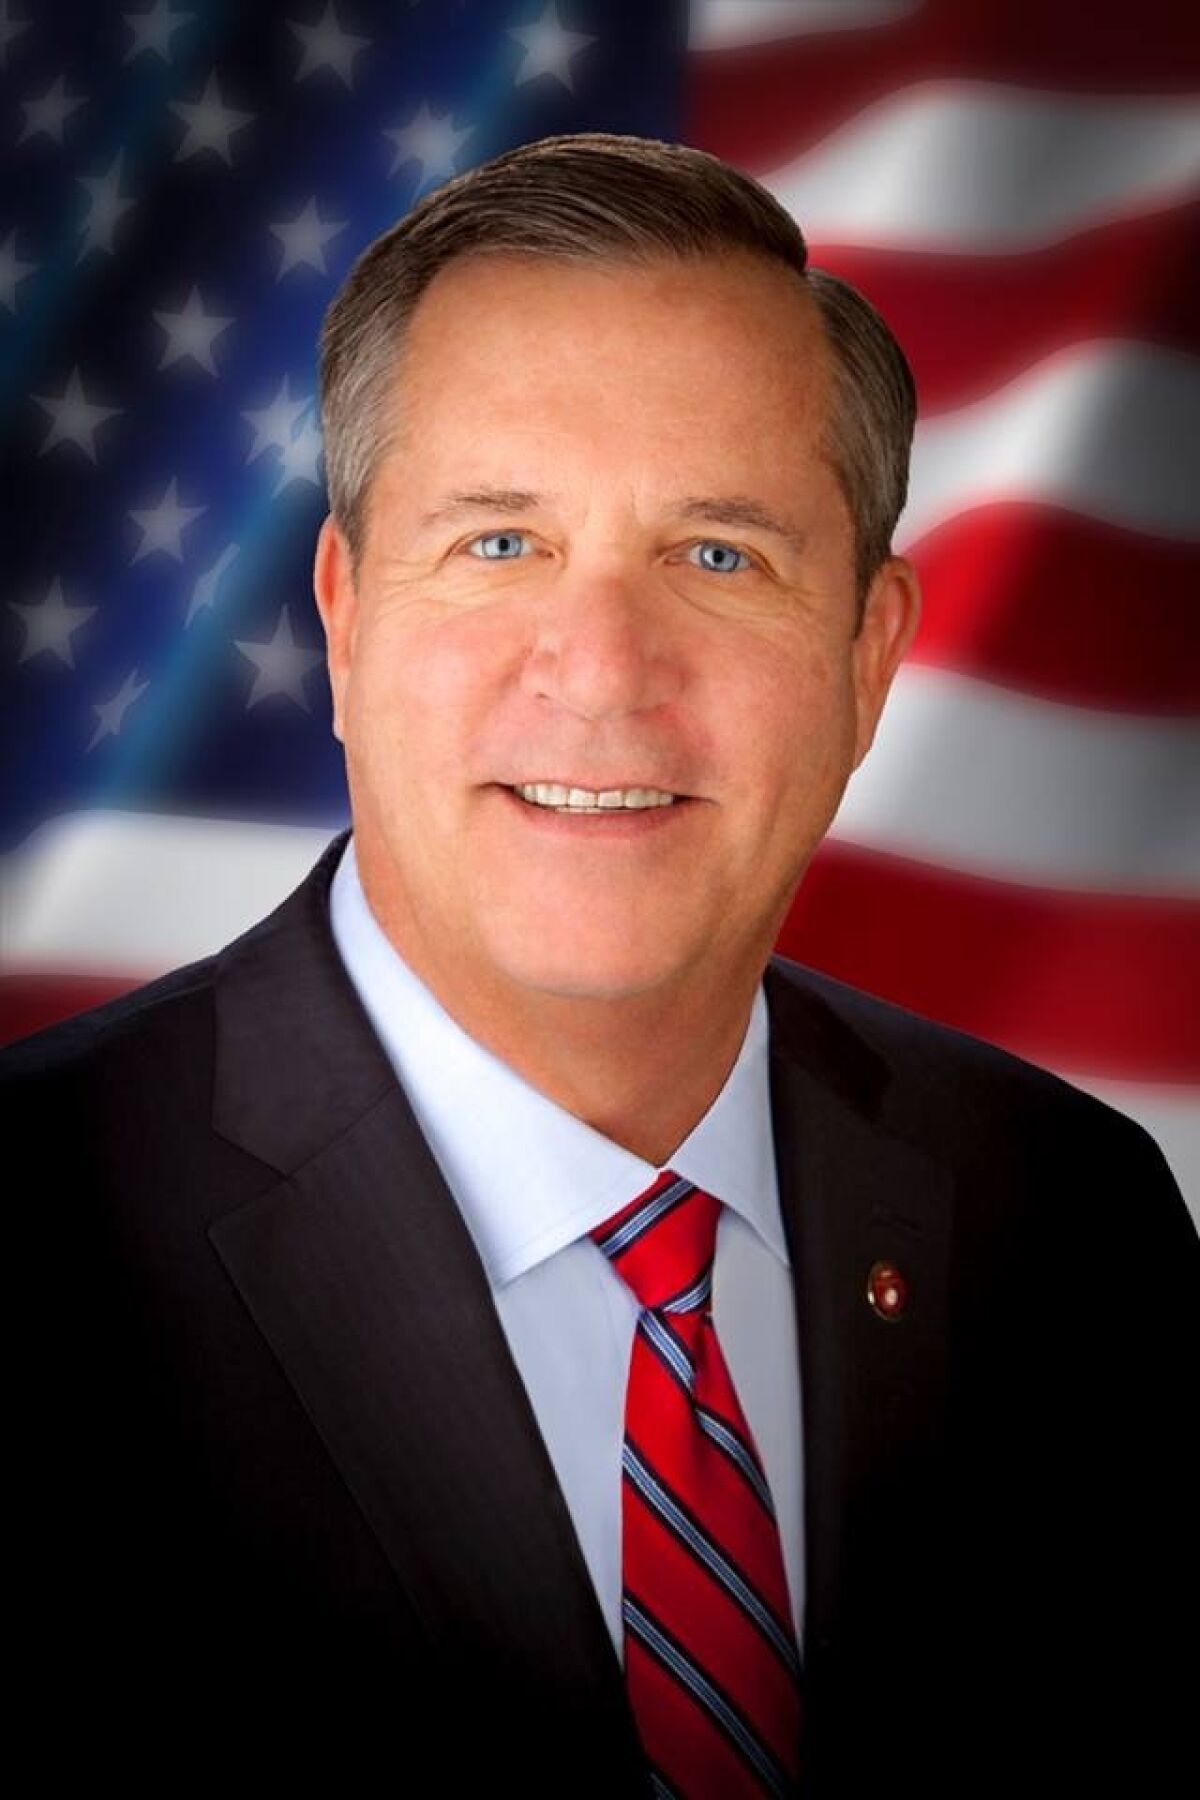 A portrait of Mission Viejo Councilman Greg Raths with the American flag as a background